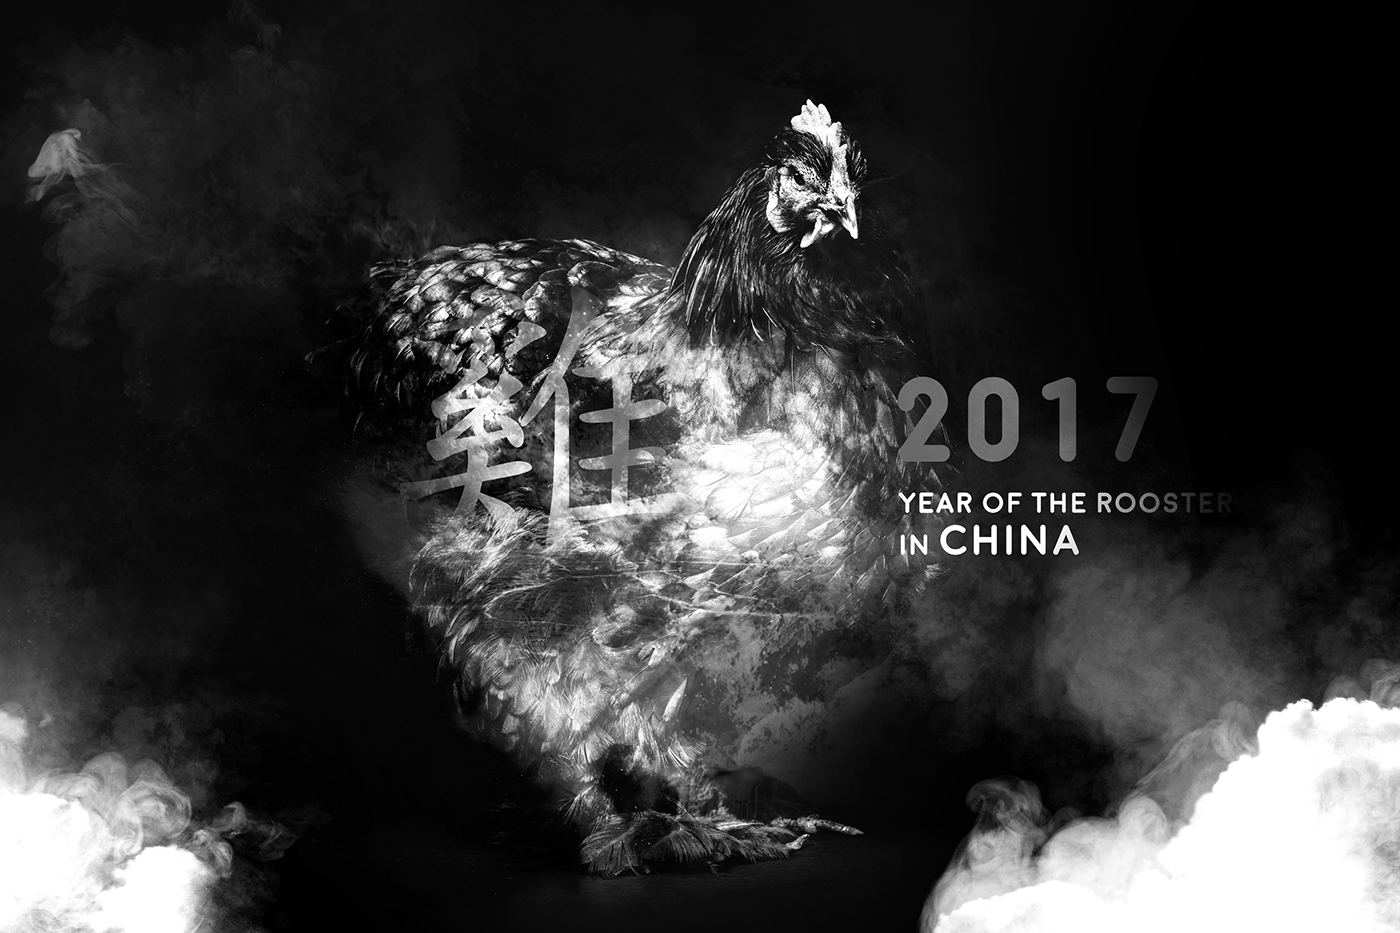 Rooster year2017 art direction people china zodiac Love support photoshop